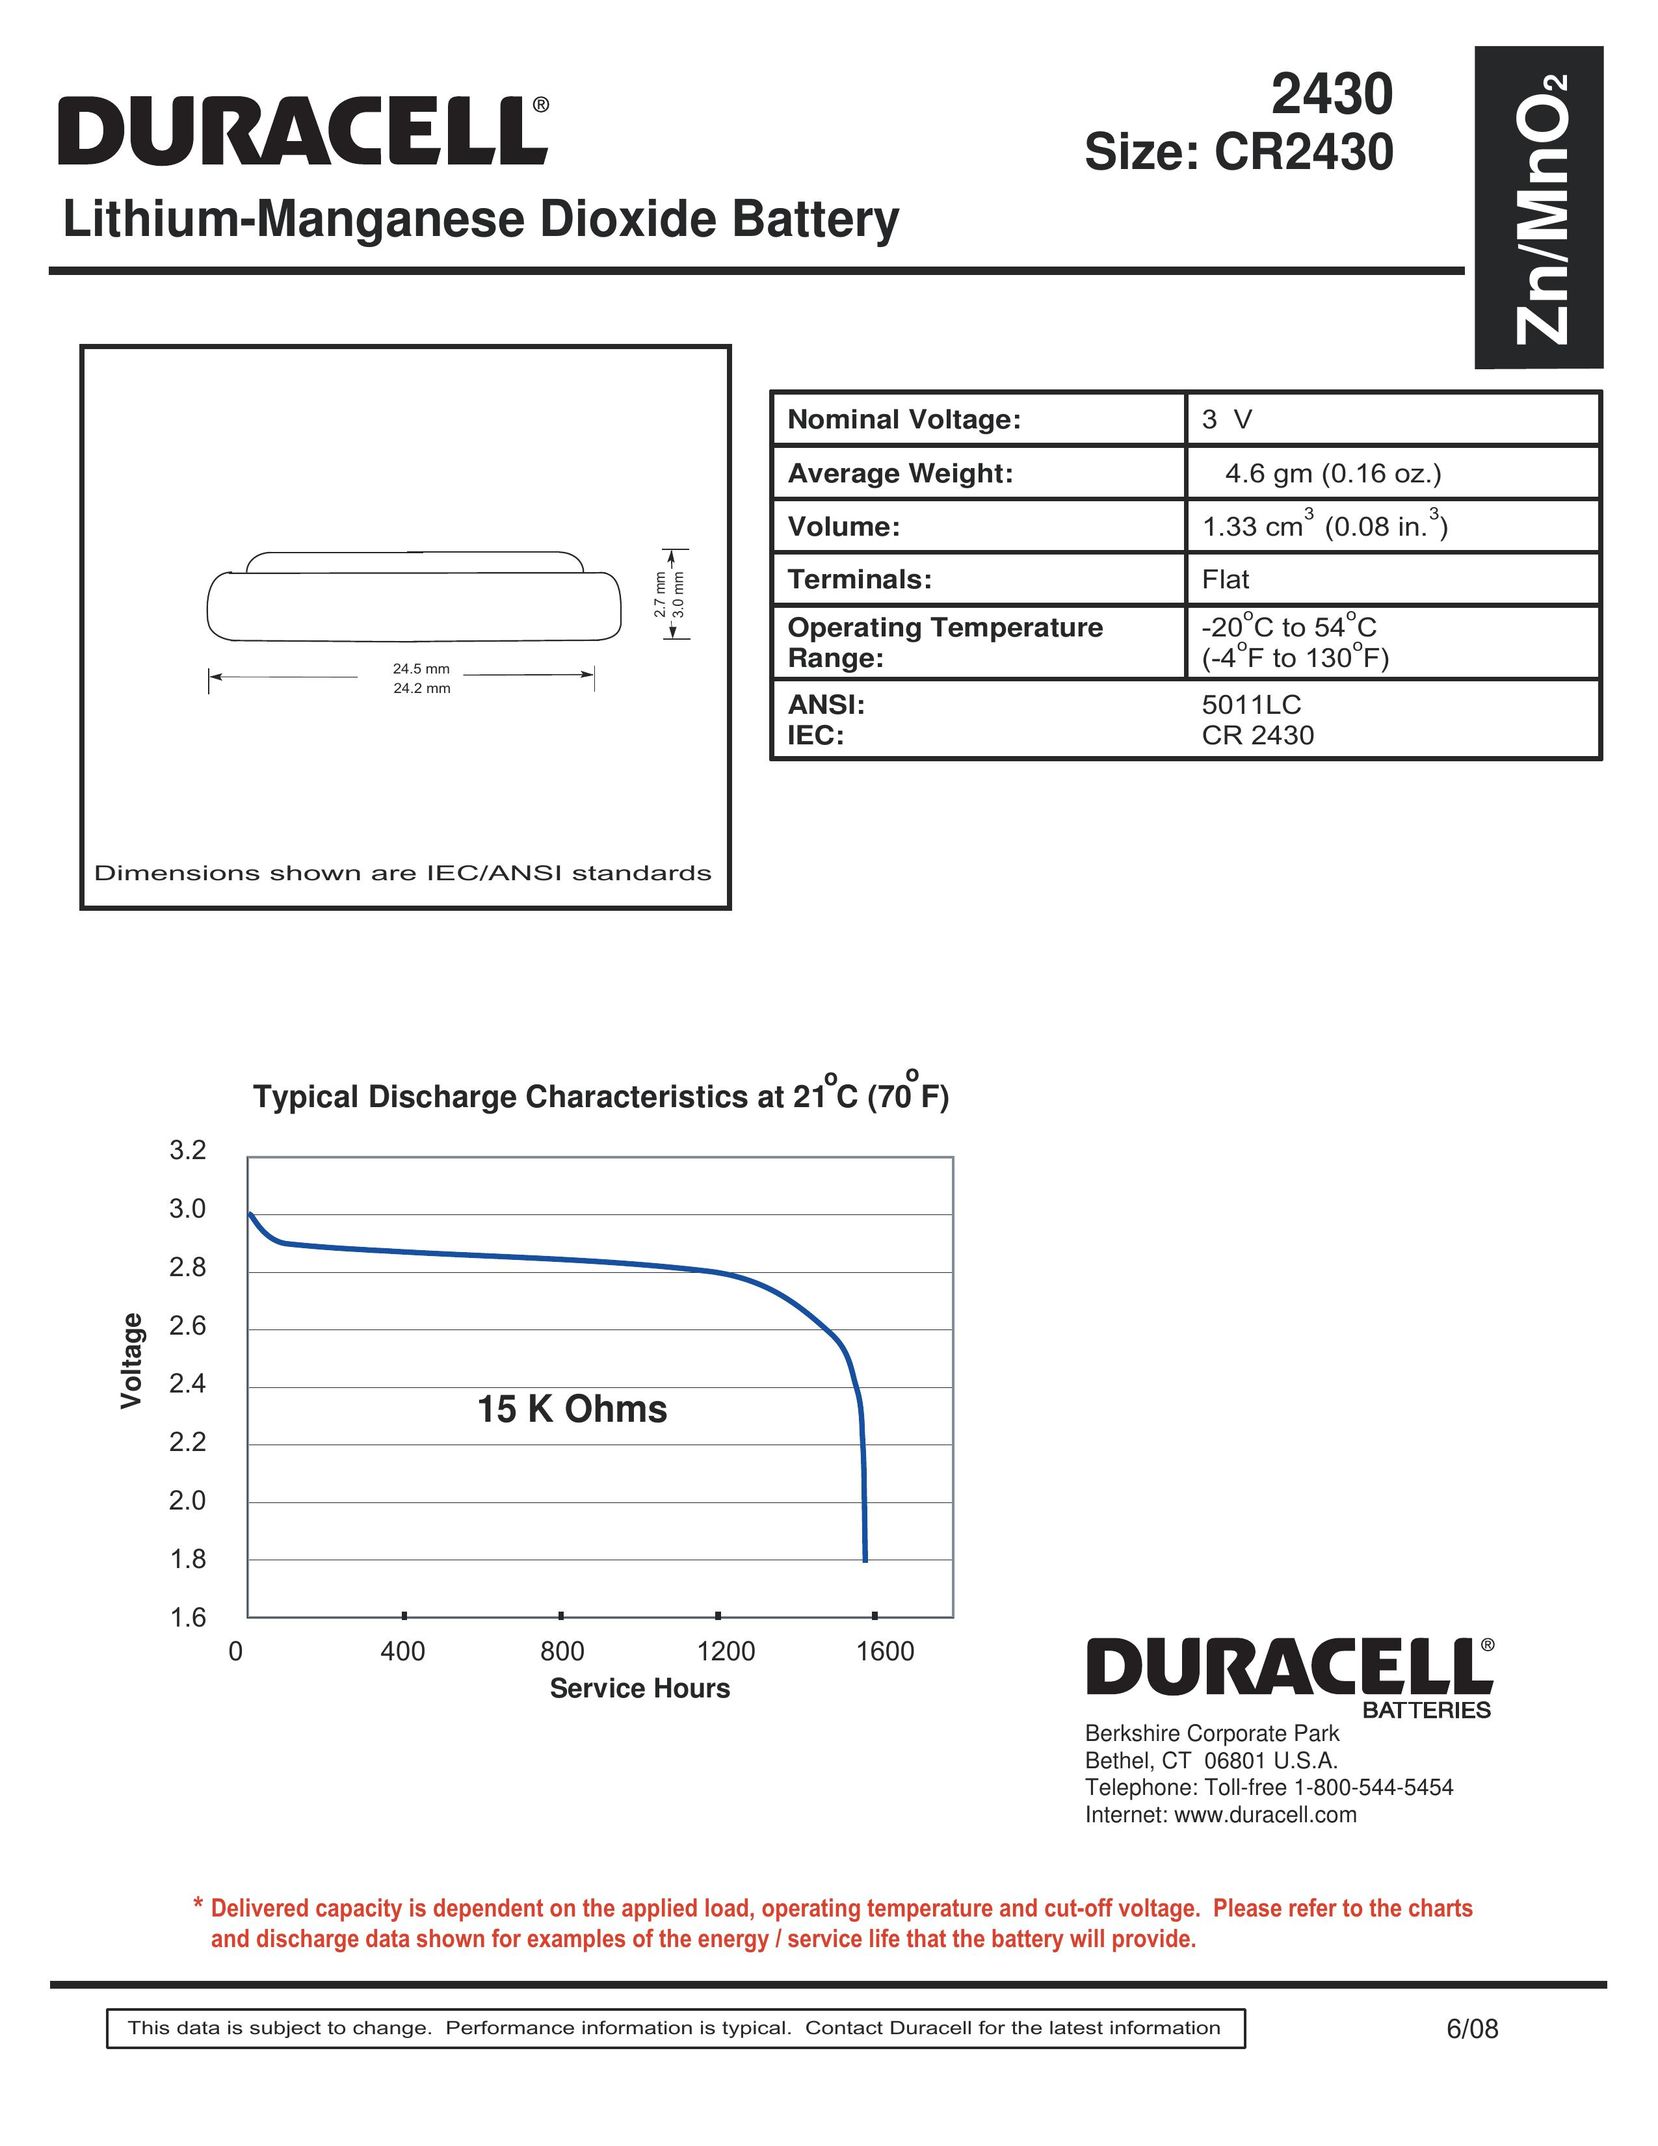 Duracell DL 2430 Power Supply User Manual